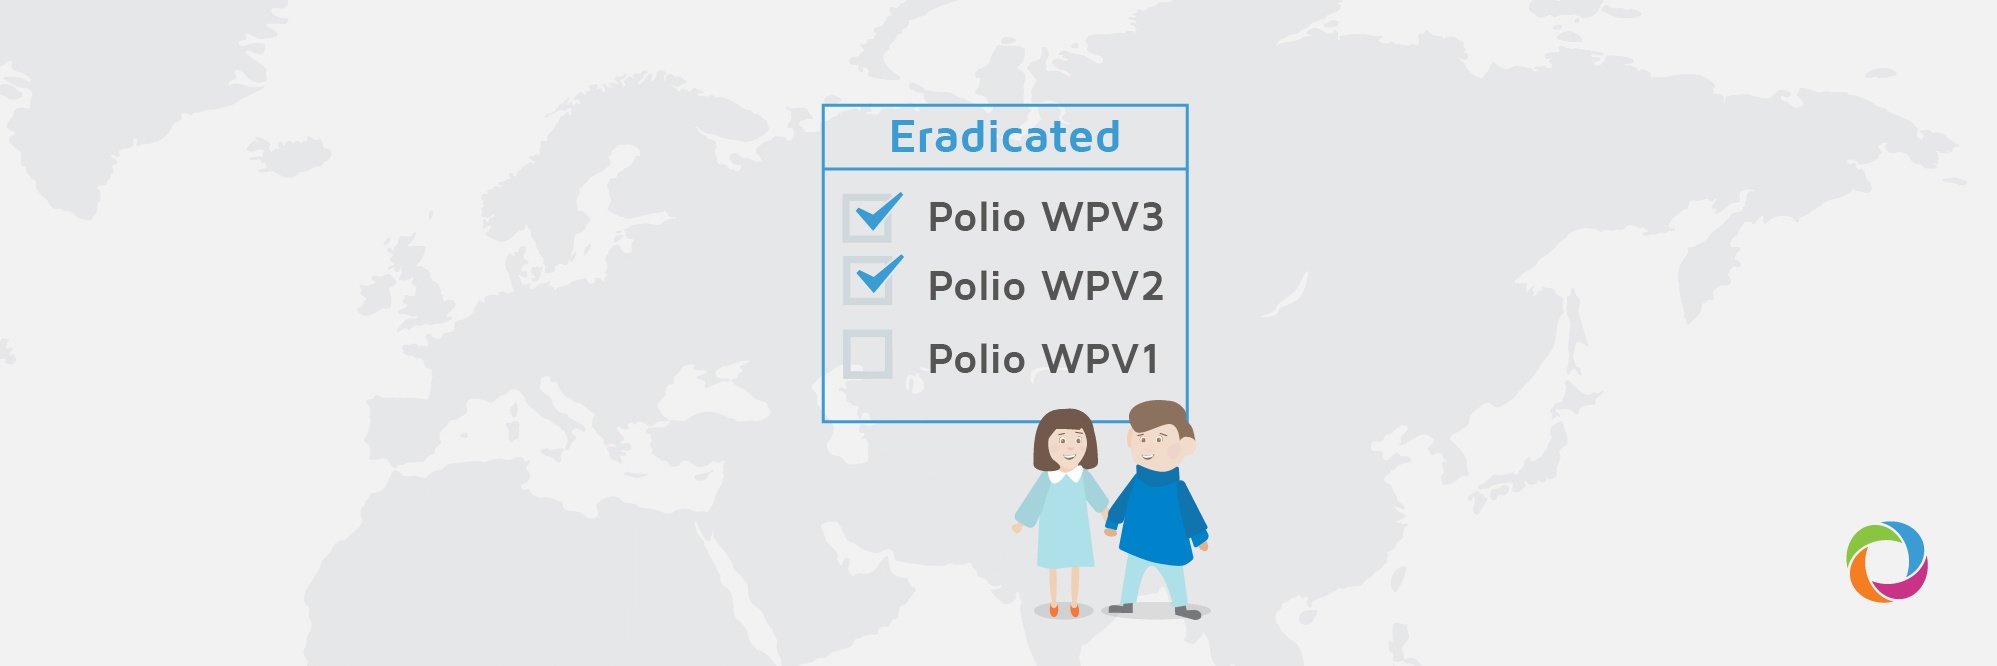 The eradication of wild polio type 3, a ray of light for humanity after decades of joint international cooperation